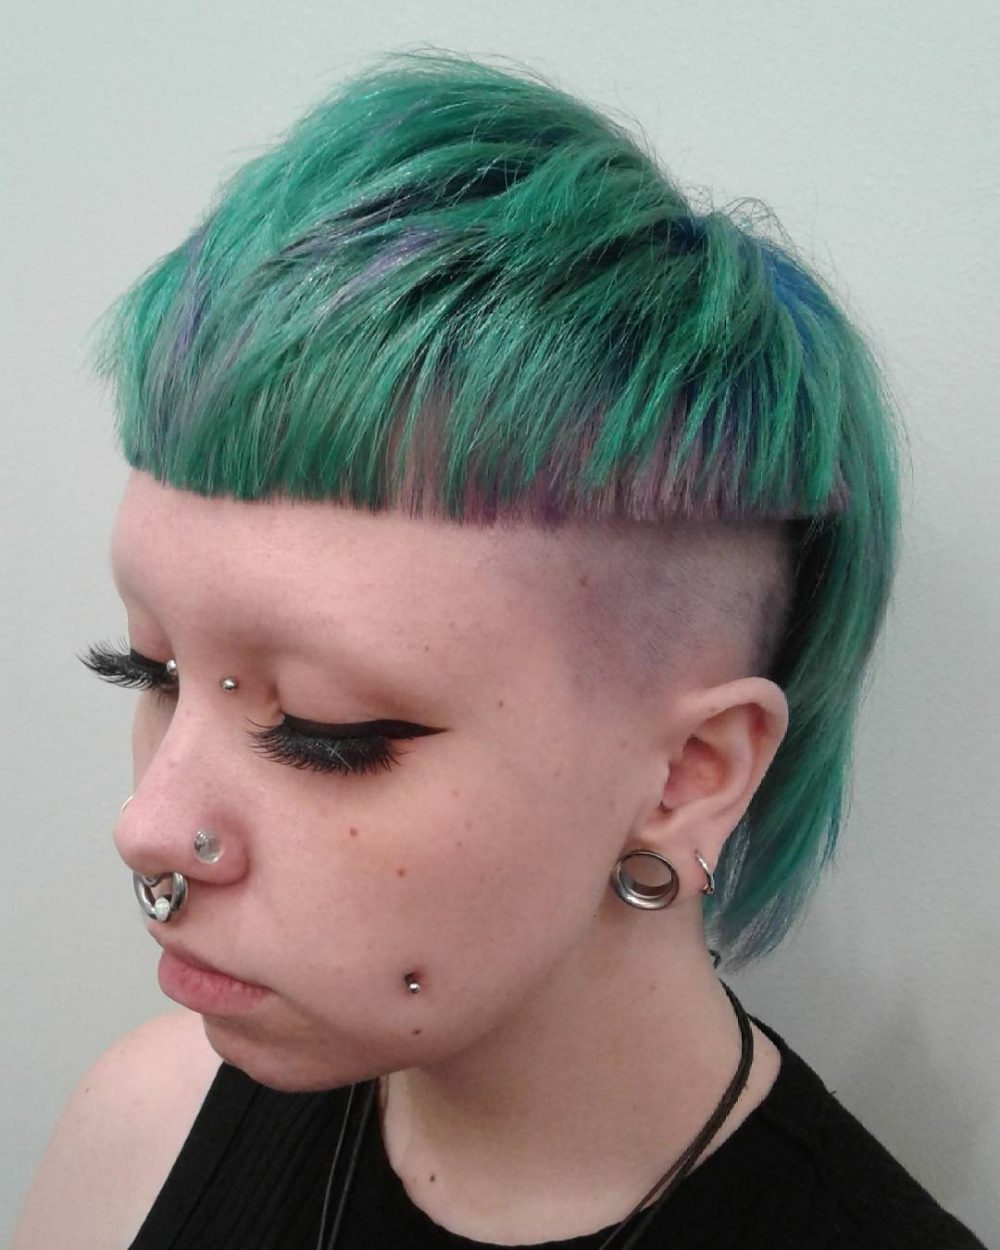 The 21 Edgiest Examples of Punk Hairstyles